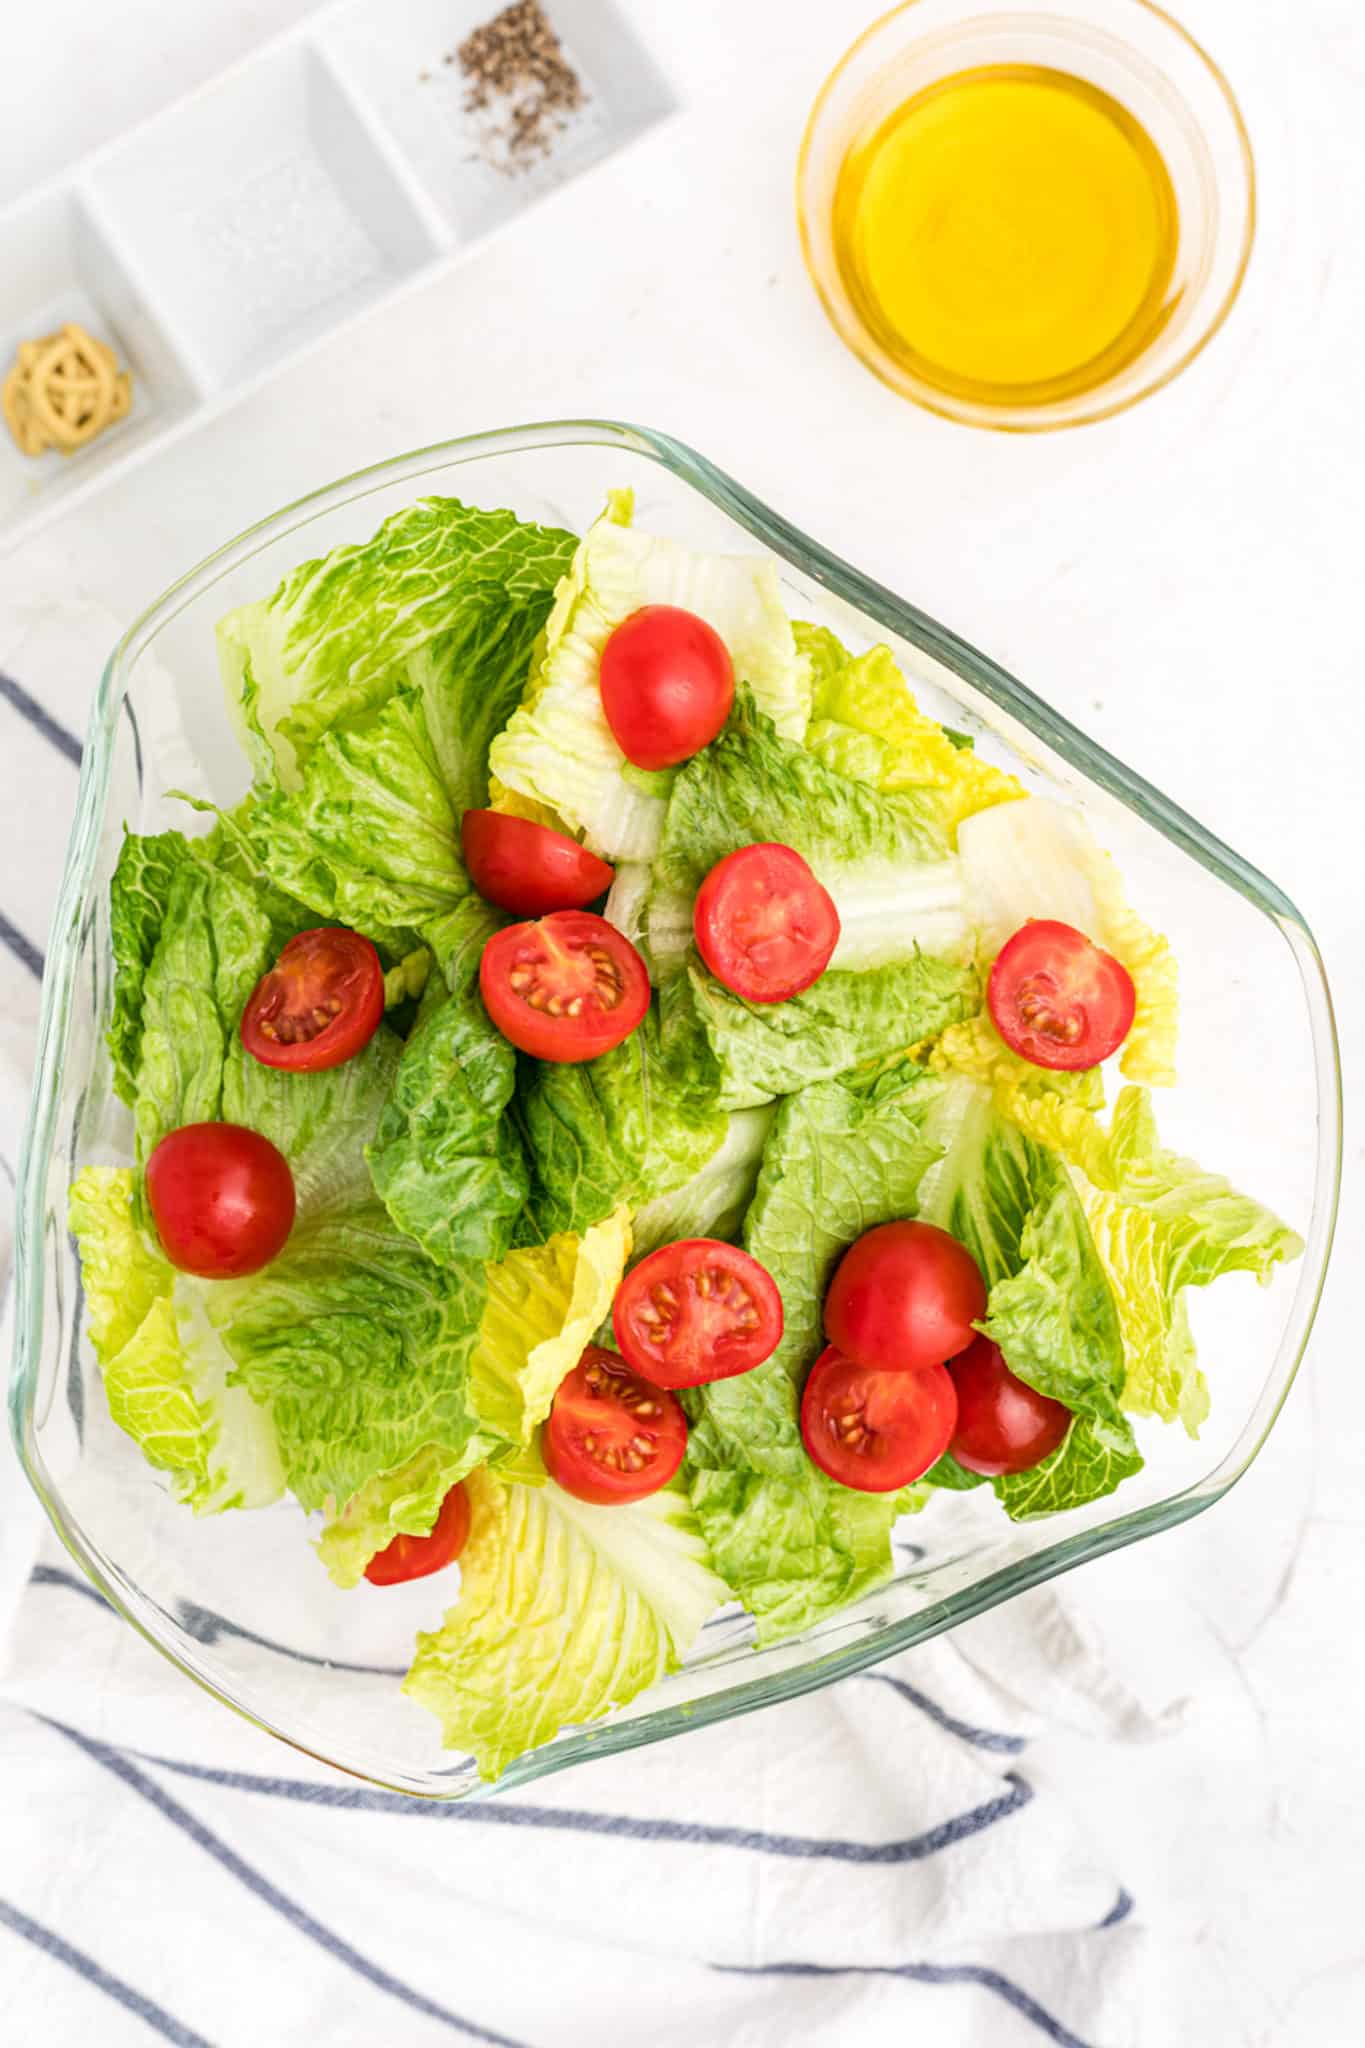 Romaine salad with a vinaigrette and tomatoes.